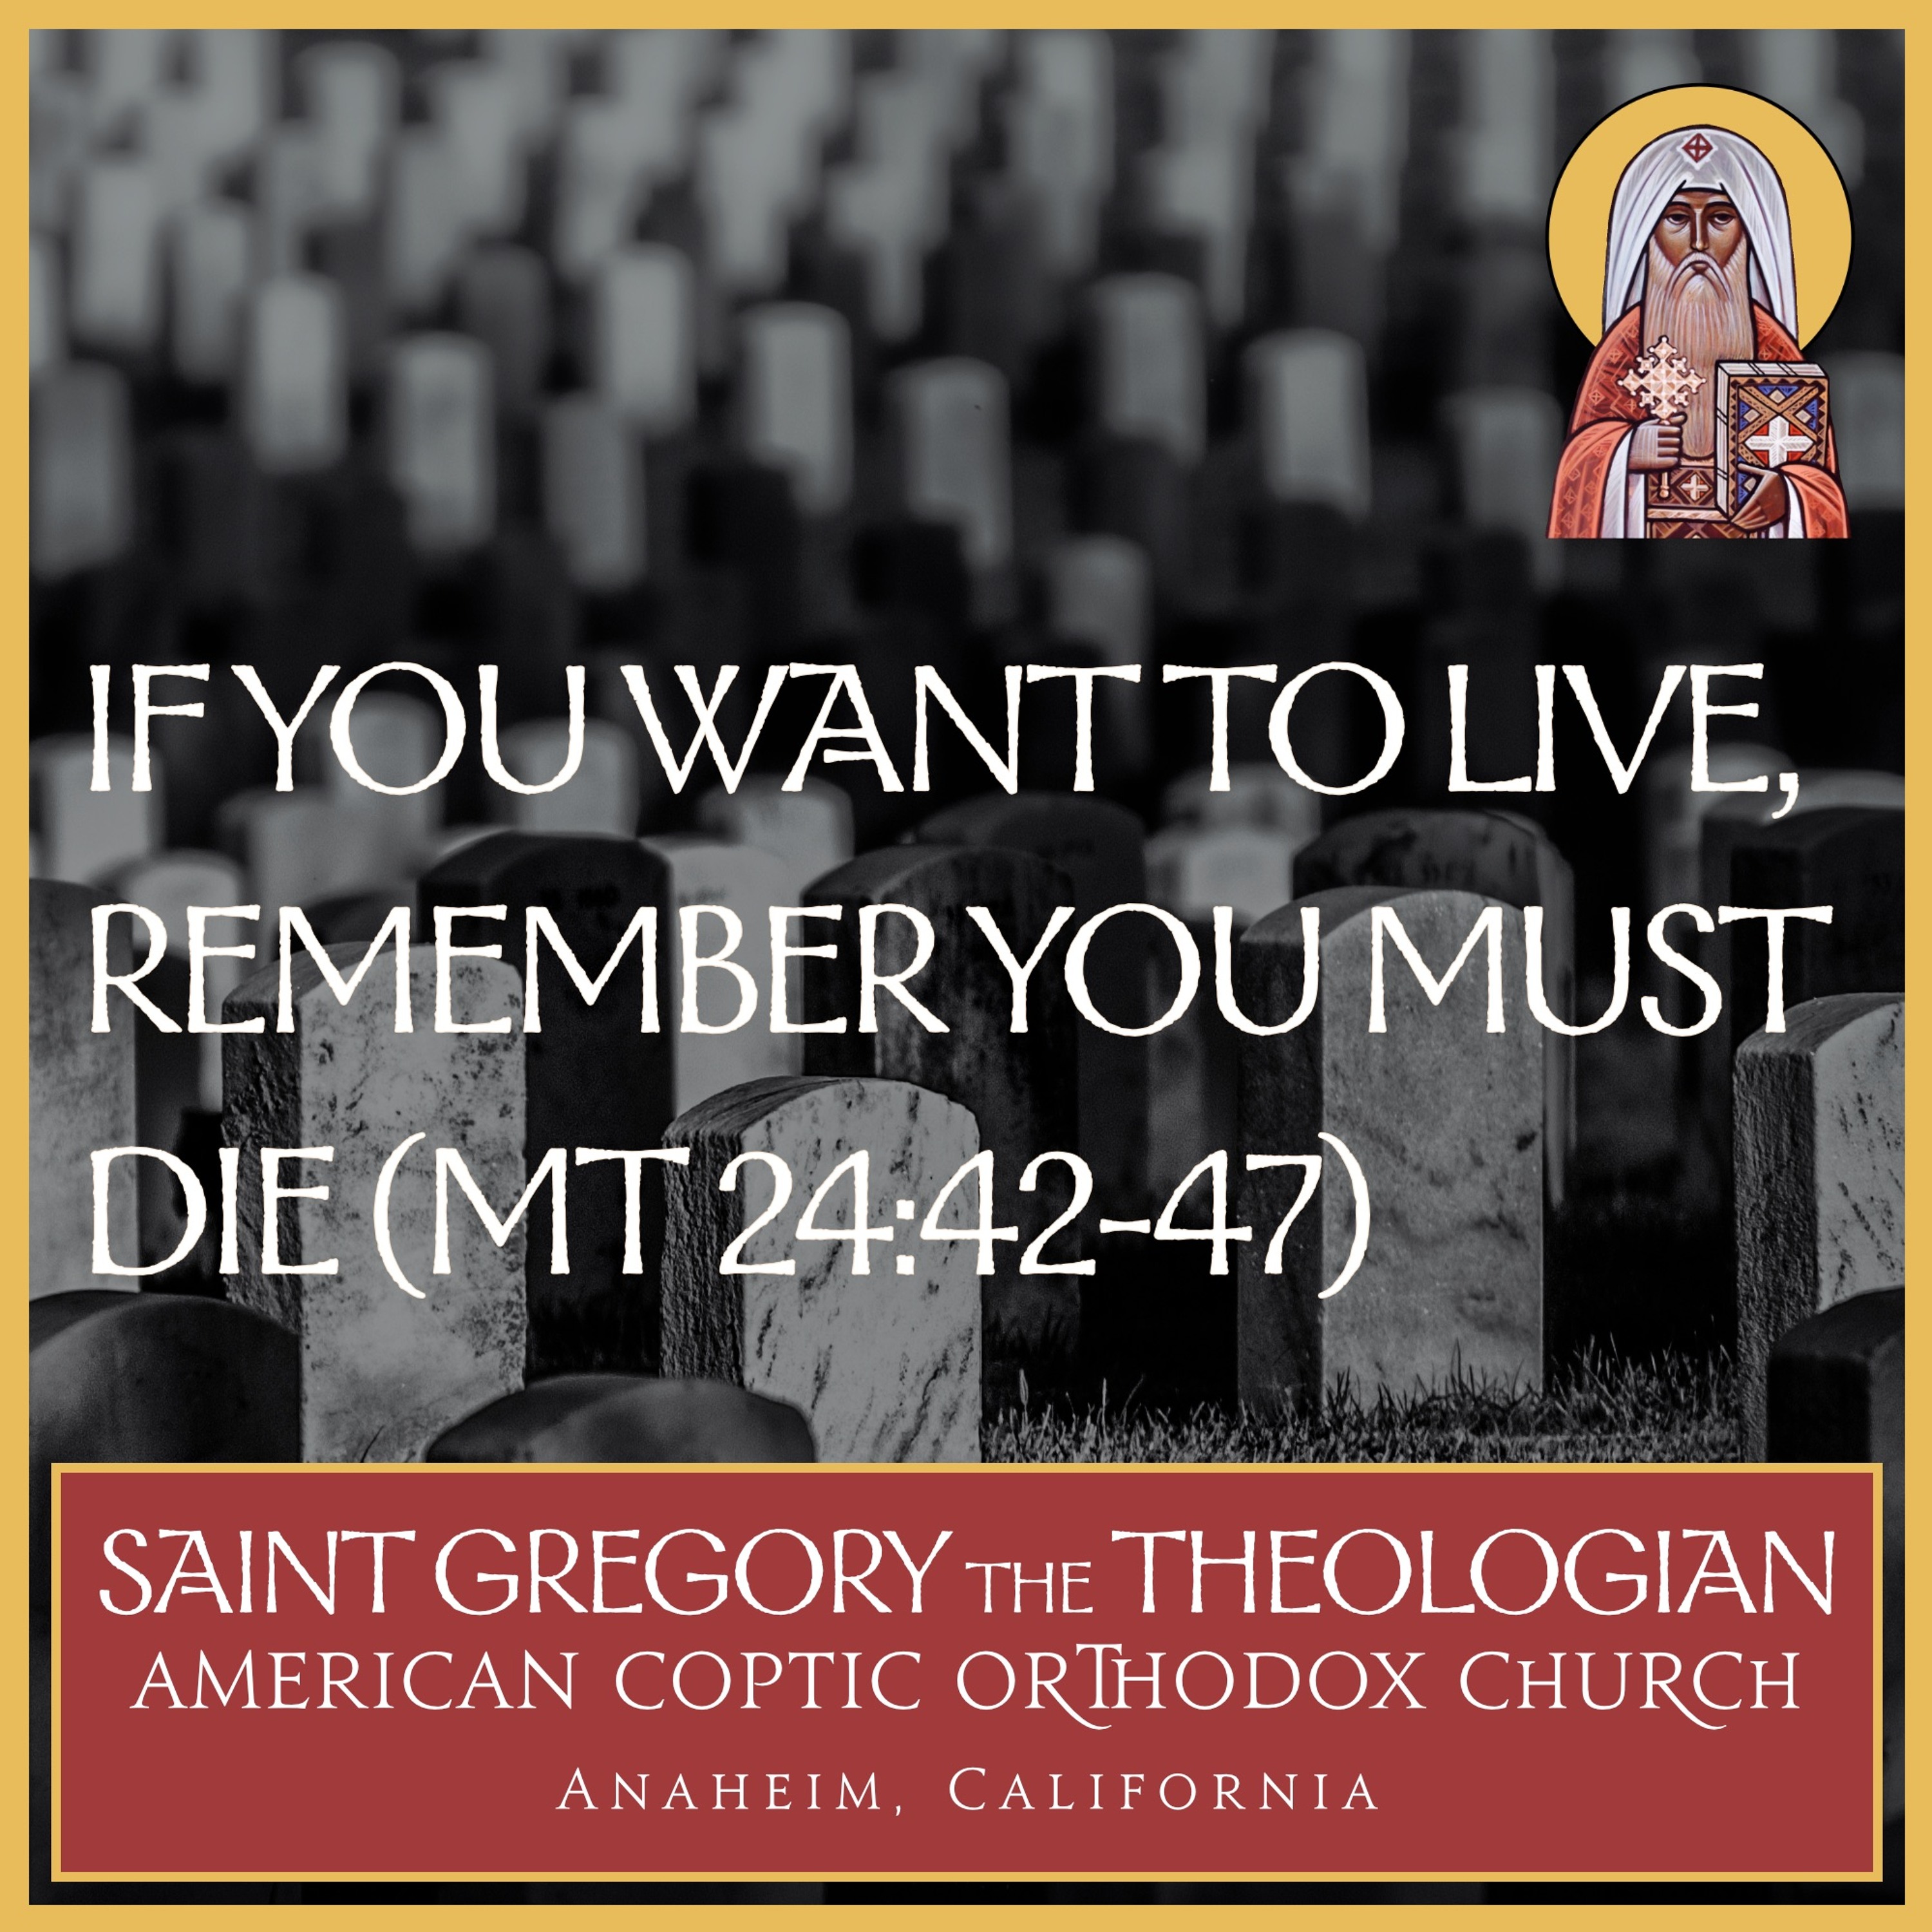 If You Want to Live, Remember You Must Die (Mt 24:42-47)